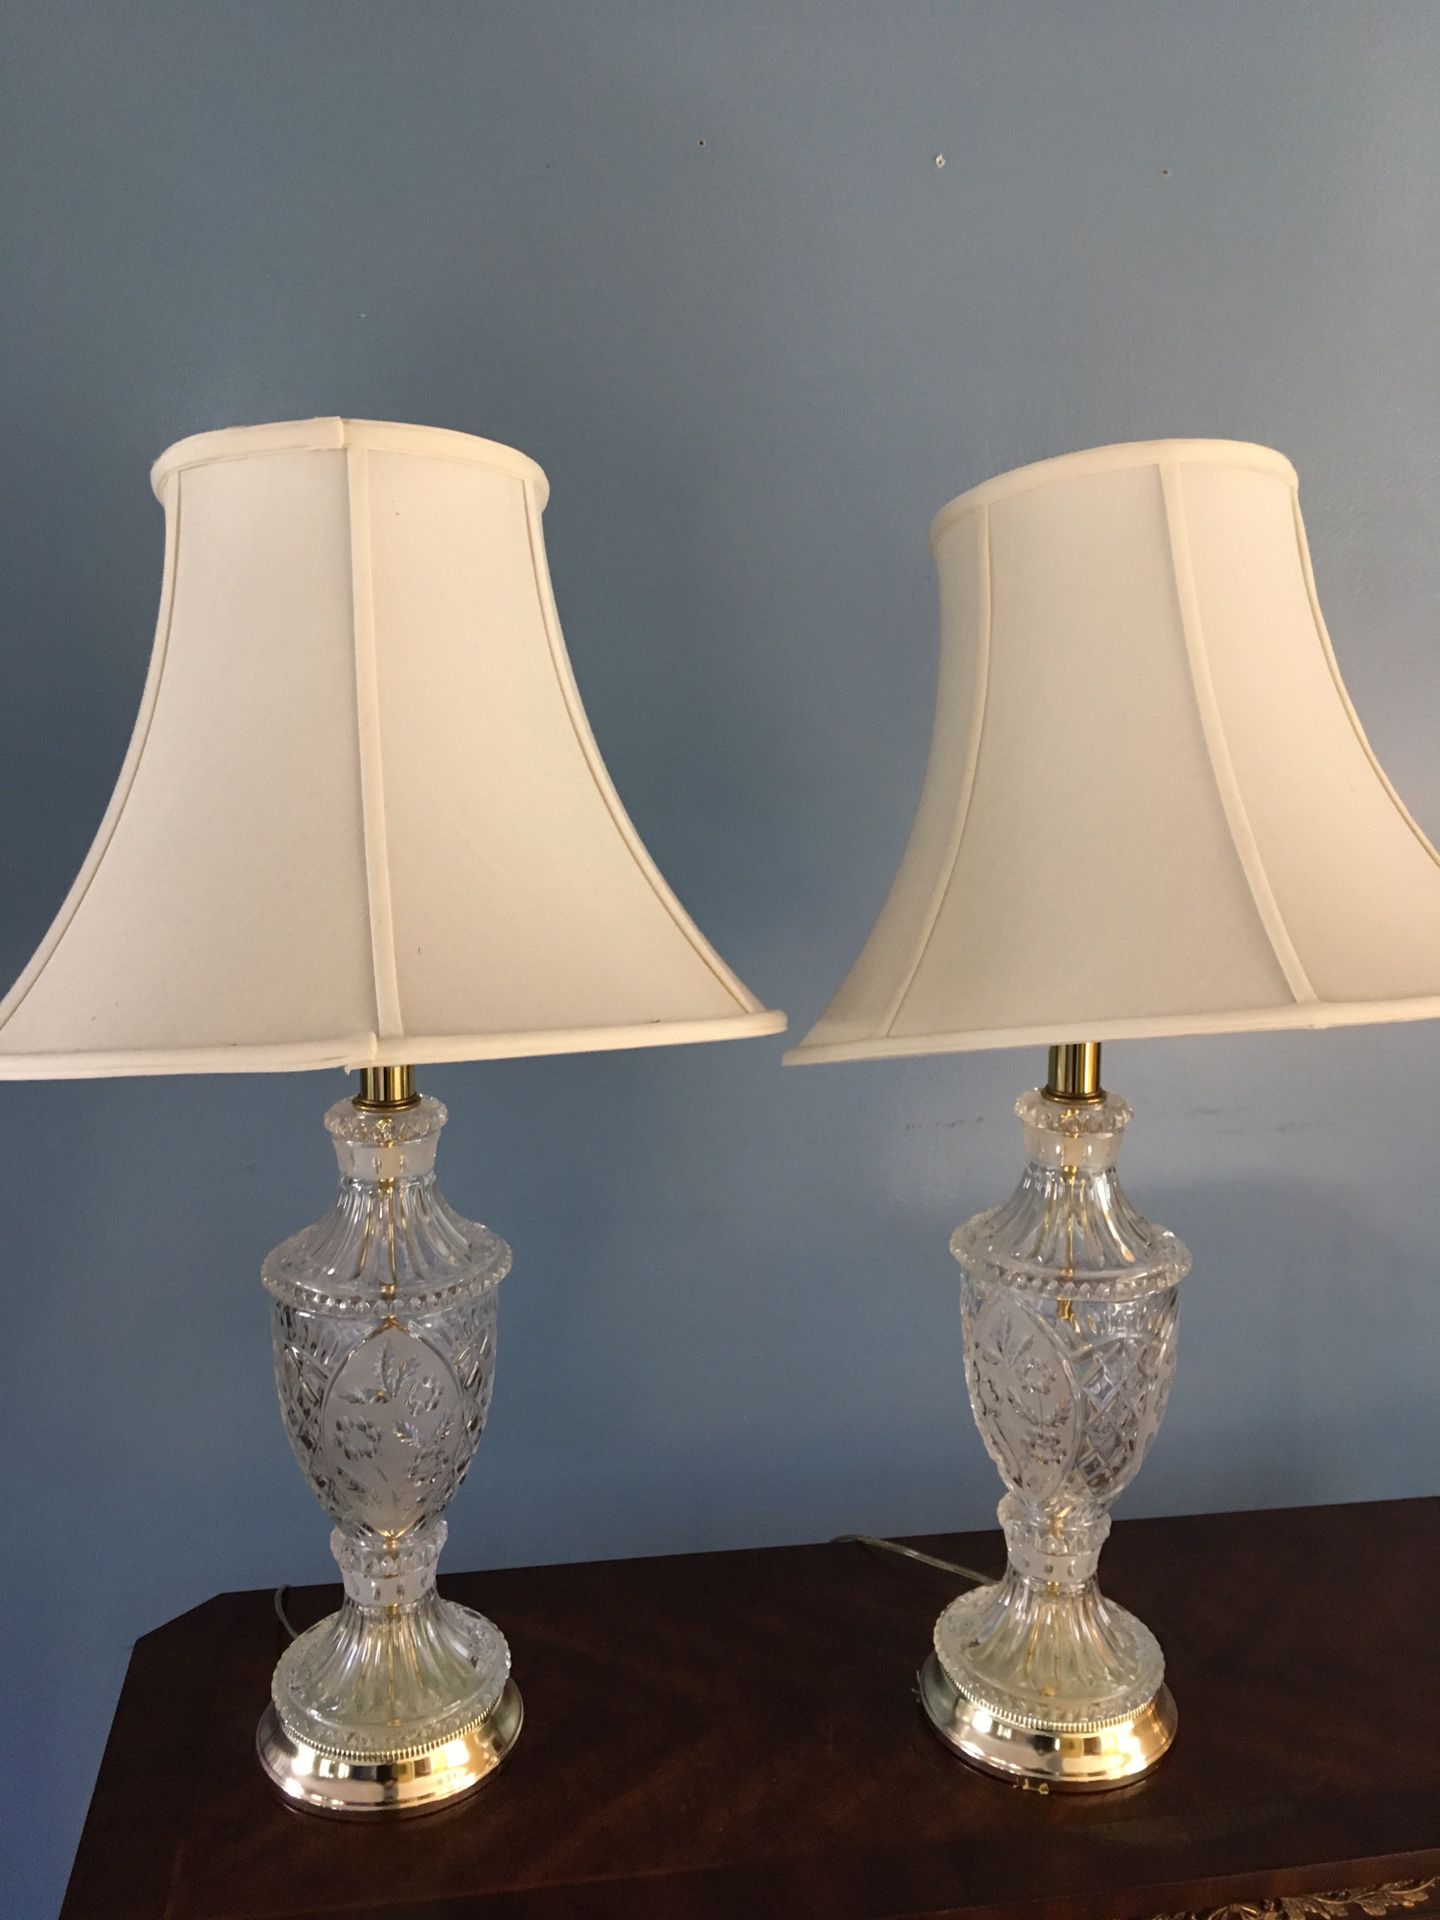 Two tables lamps